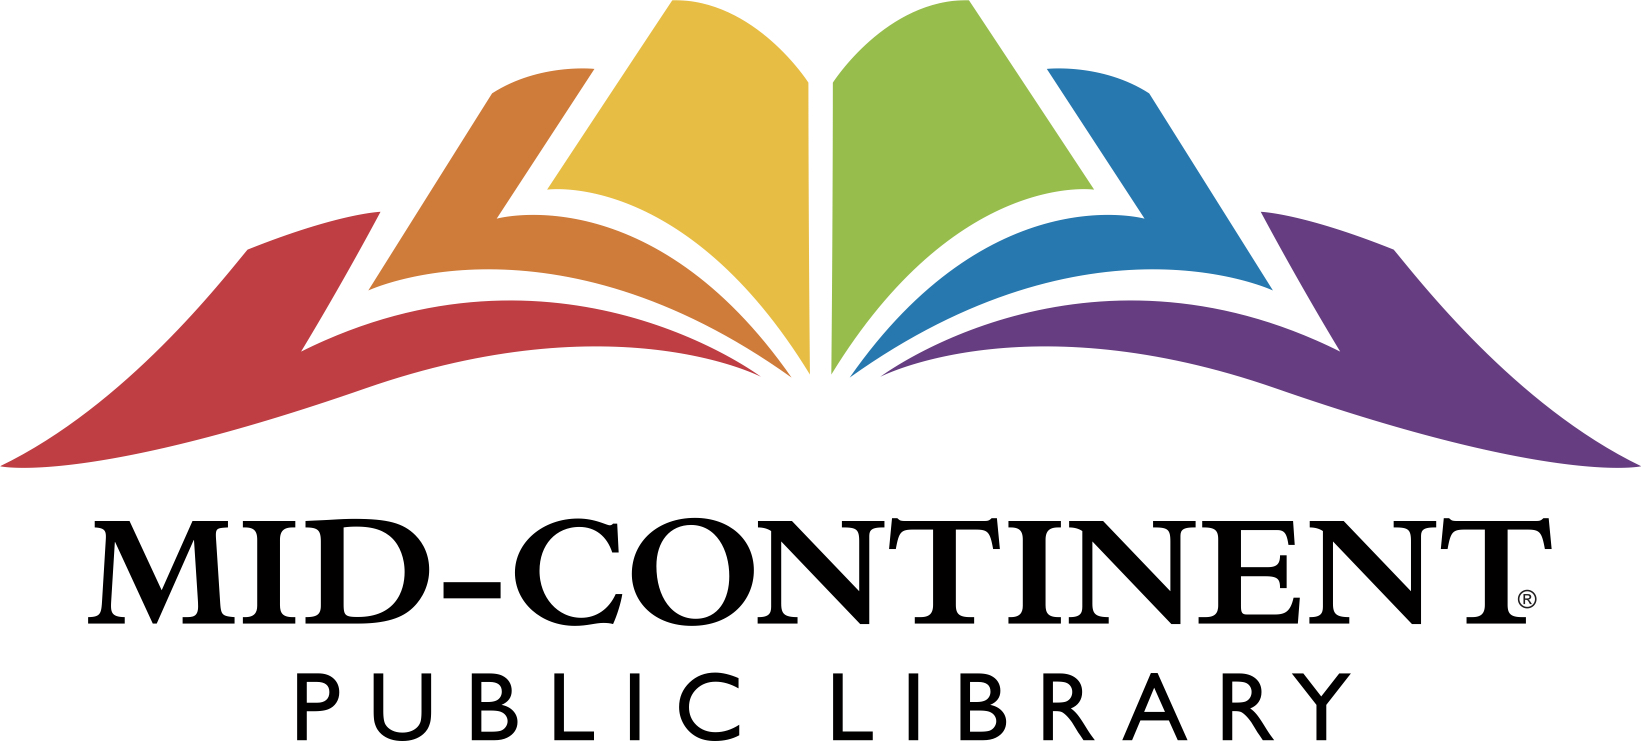 Home | Mid-Continent Public Library